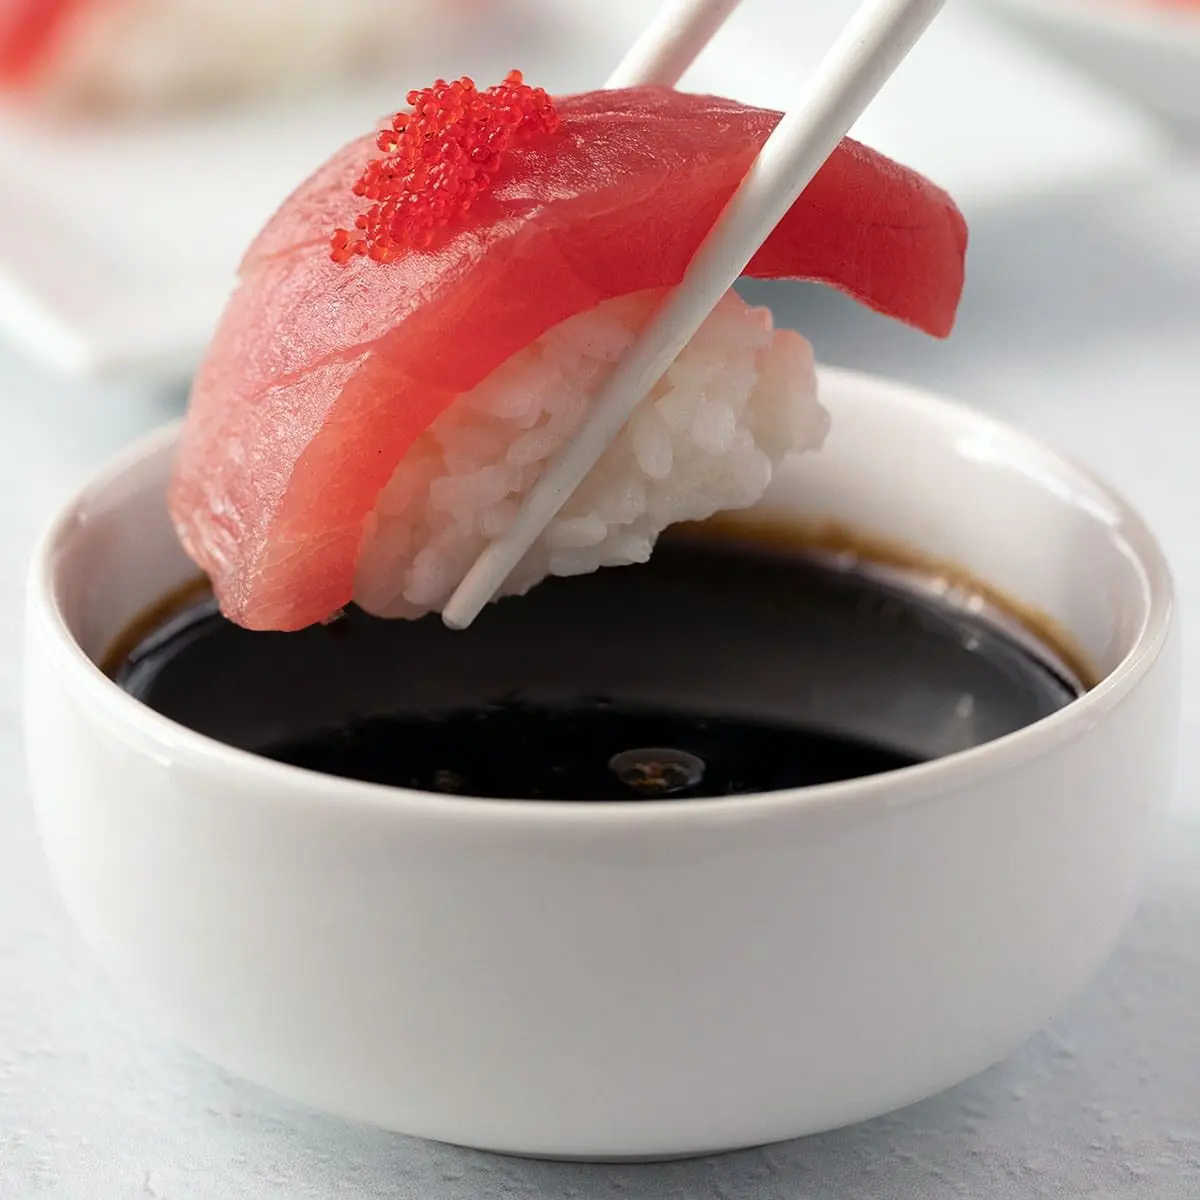 Tuna Nigiri being dipped into a white bowl of eel sauce.